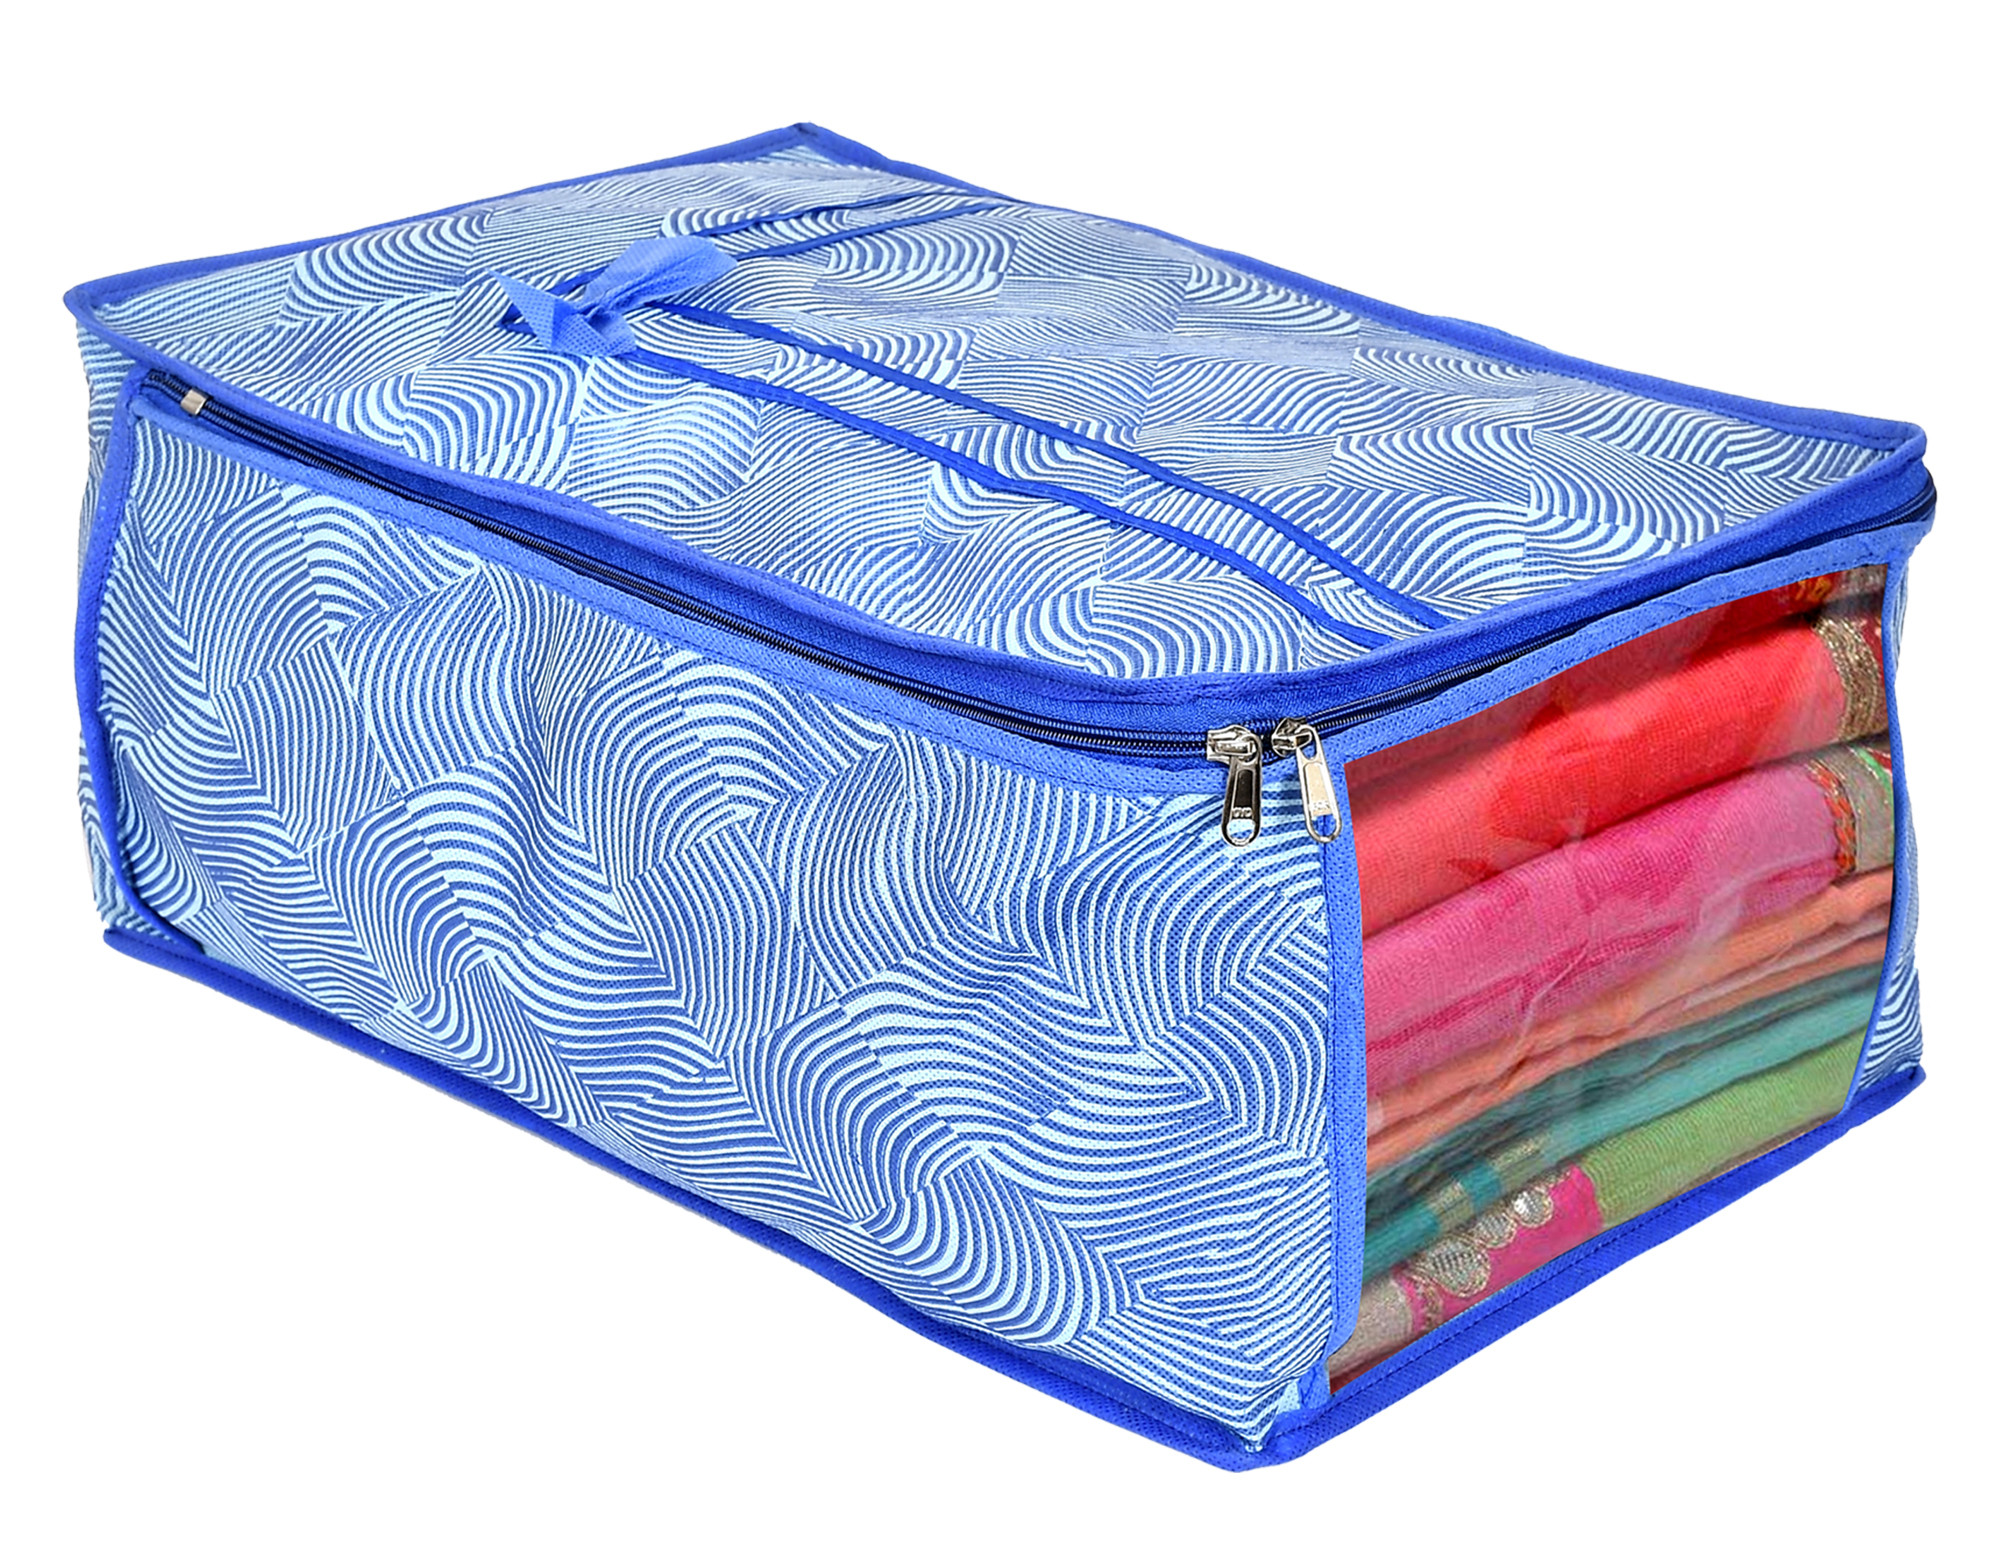 Kuber Industries Metalic Lahariya Print Non Woven Saree Cover And 2 Pieces Underbed Storage Bag, Storage Organiser, Blanket Cover (Blue)